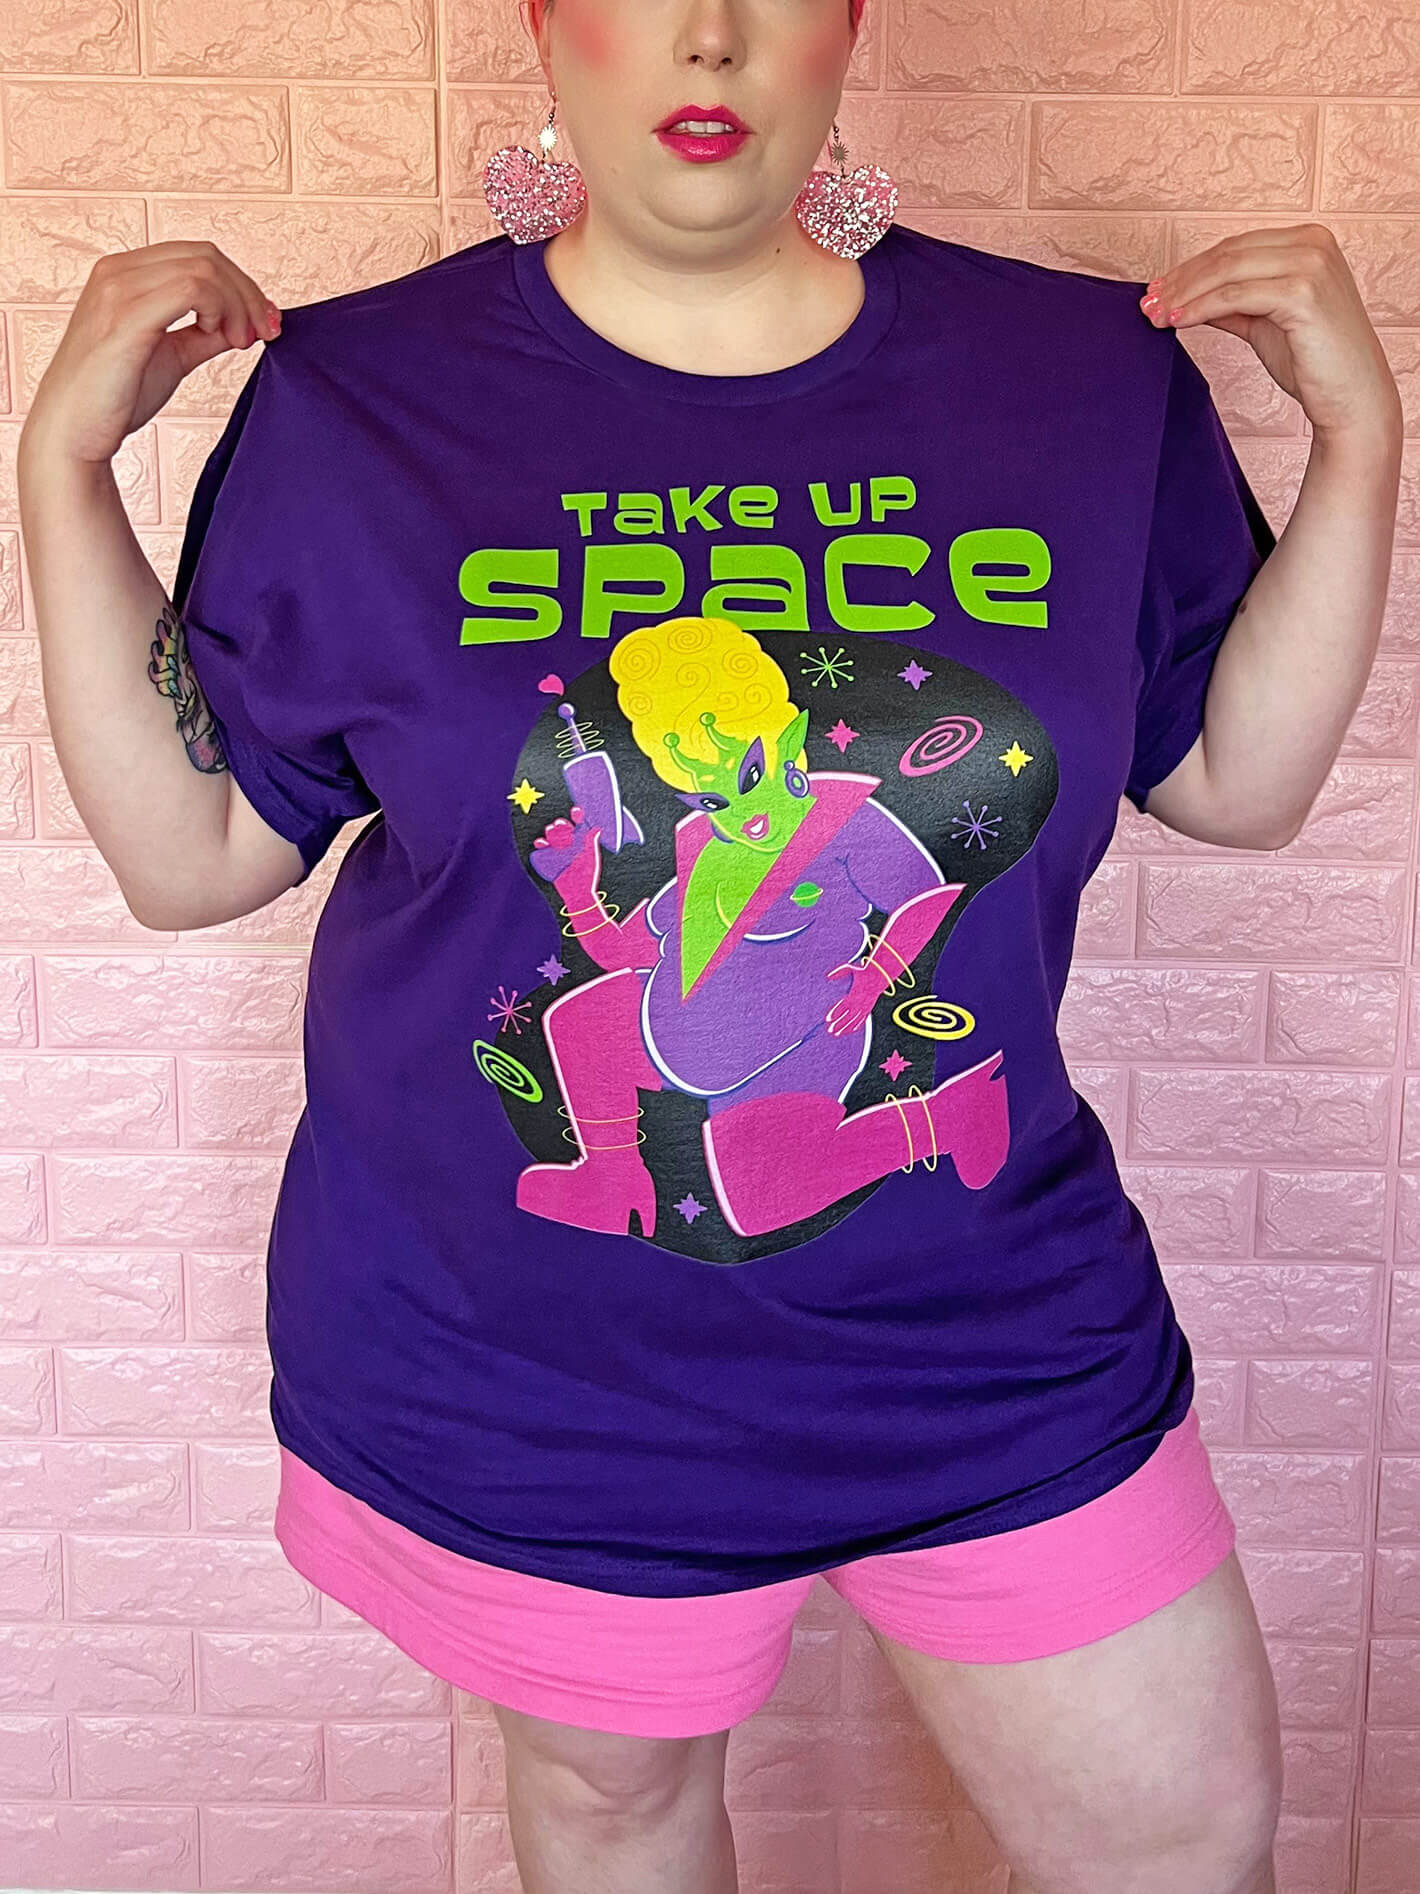 Take up space graphic tee.